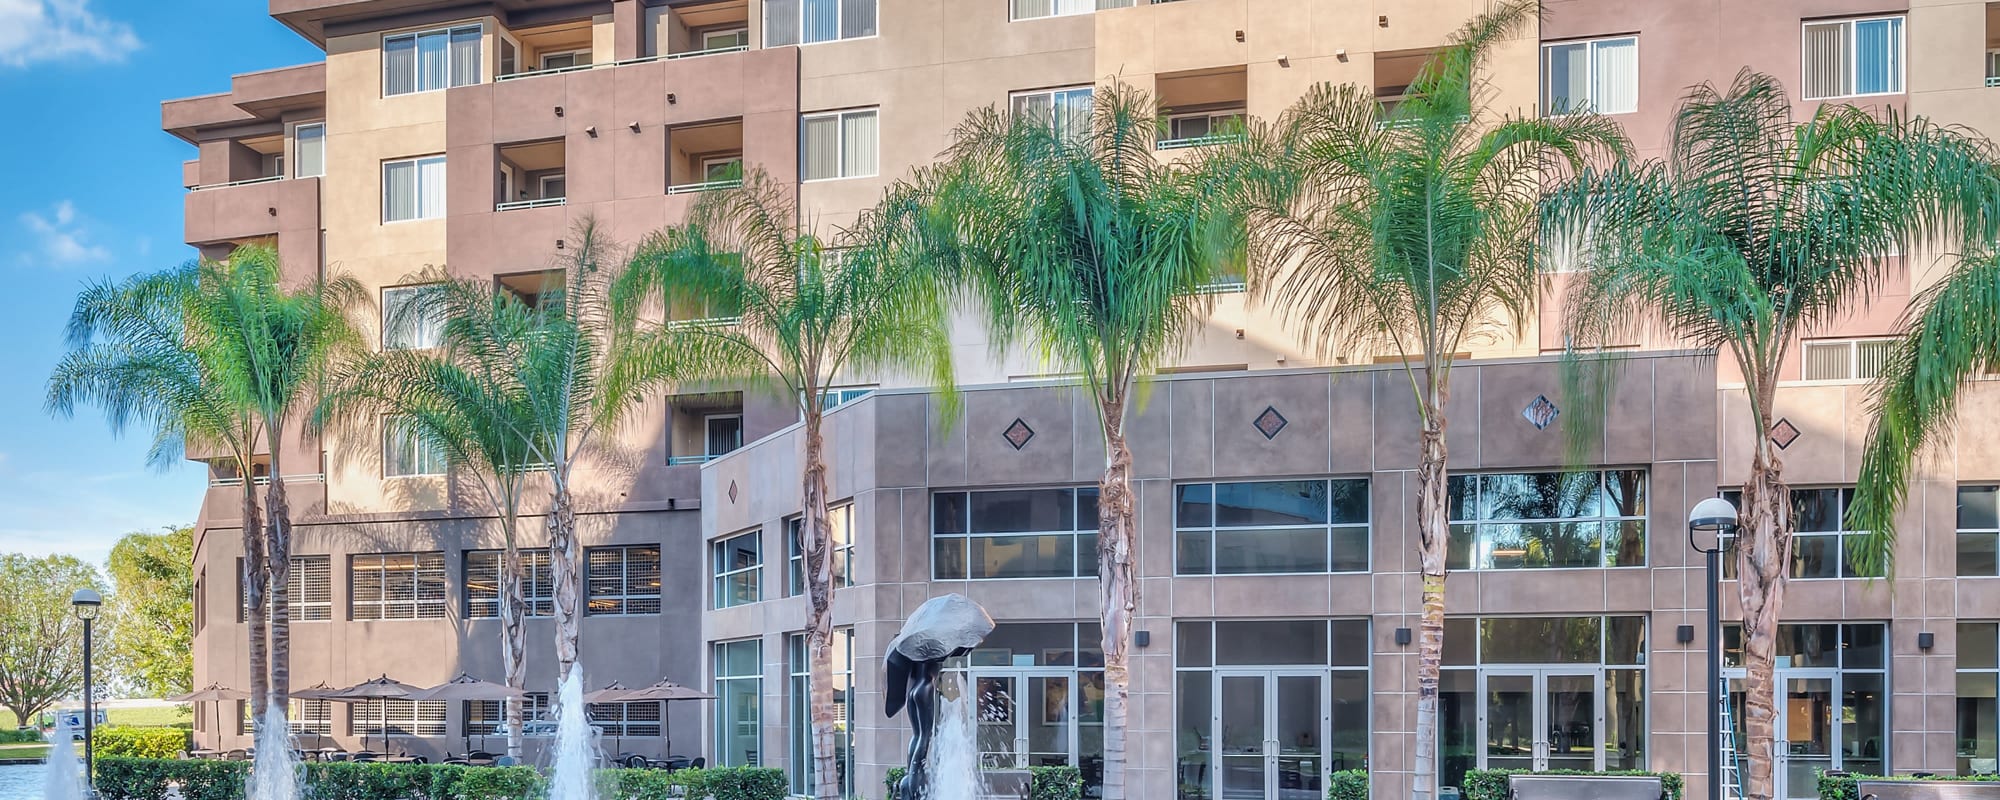 Map and directions to The Pointe Apartments in Brea, California